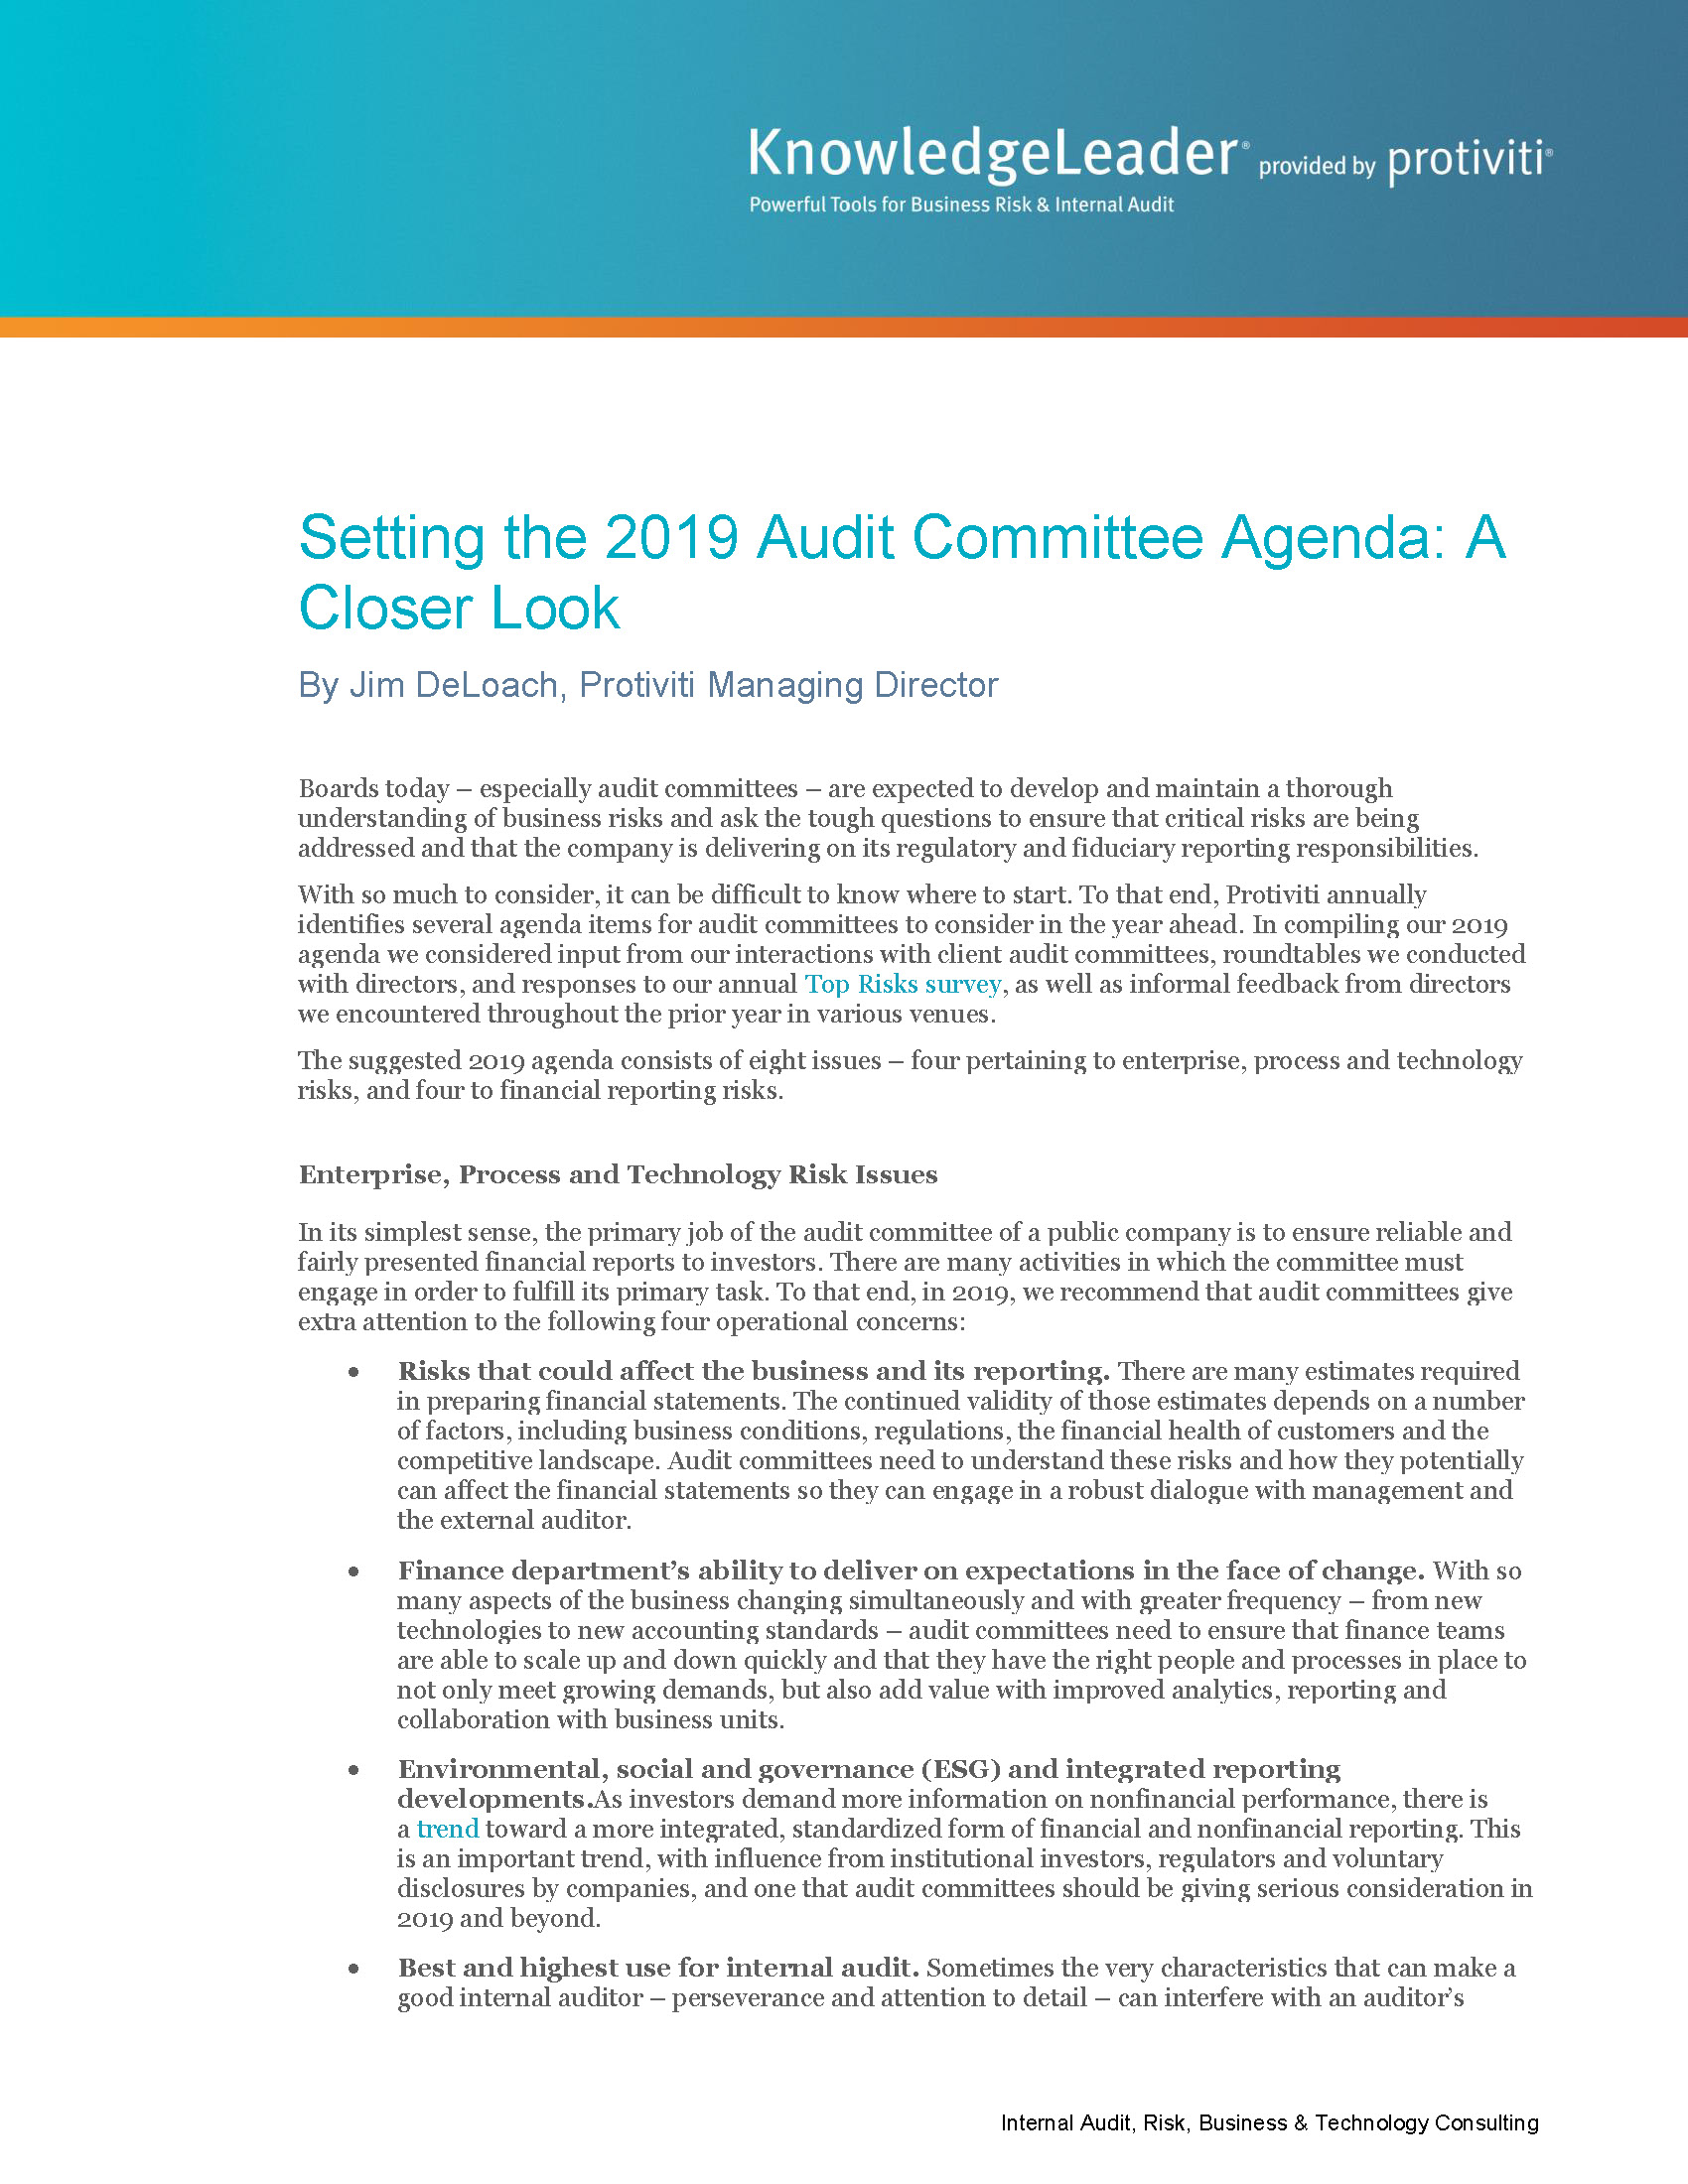 Screenshot of the first page of Setting the 2019 Audit Committee Agenda A Closer Look